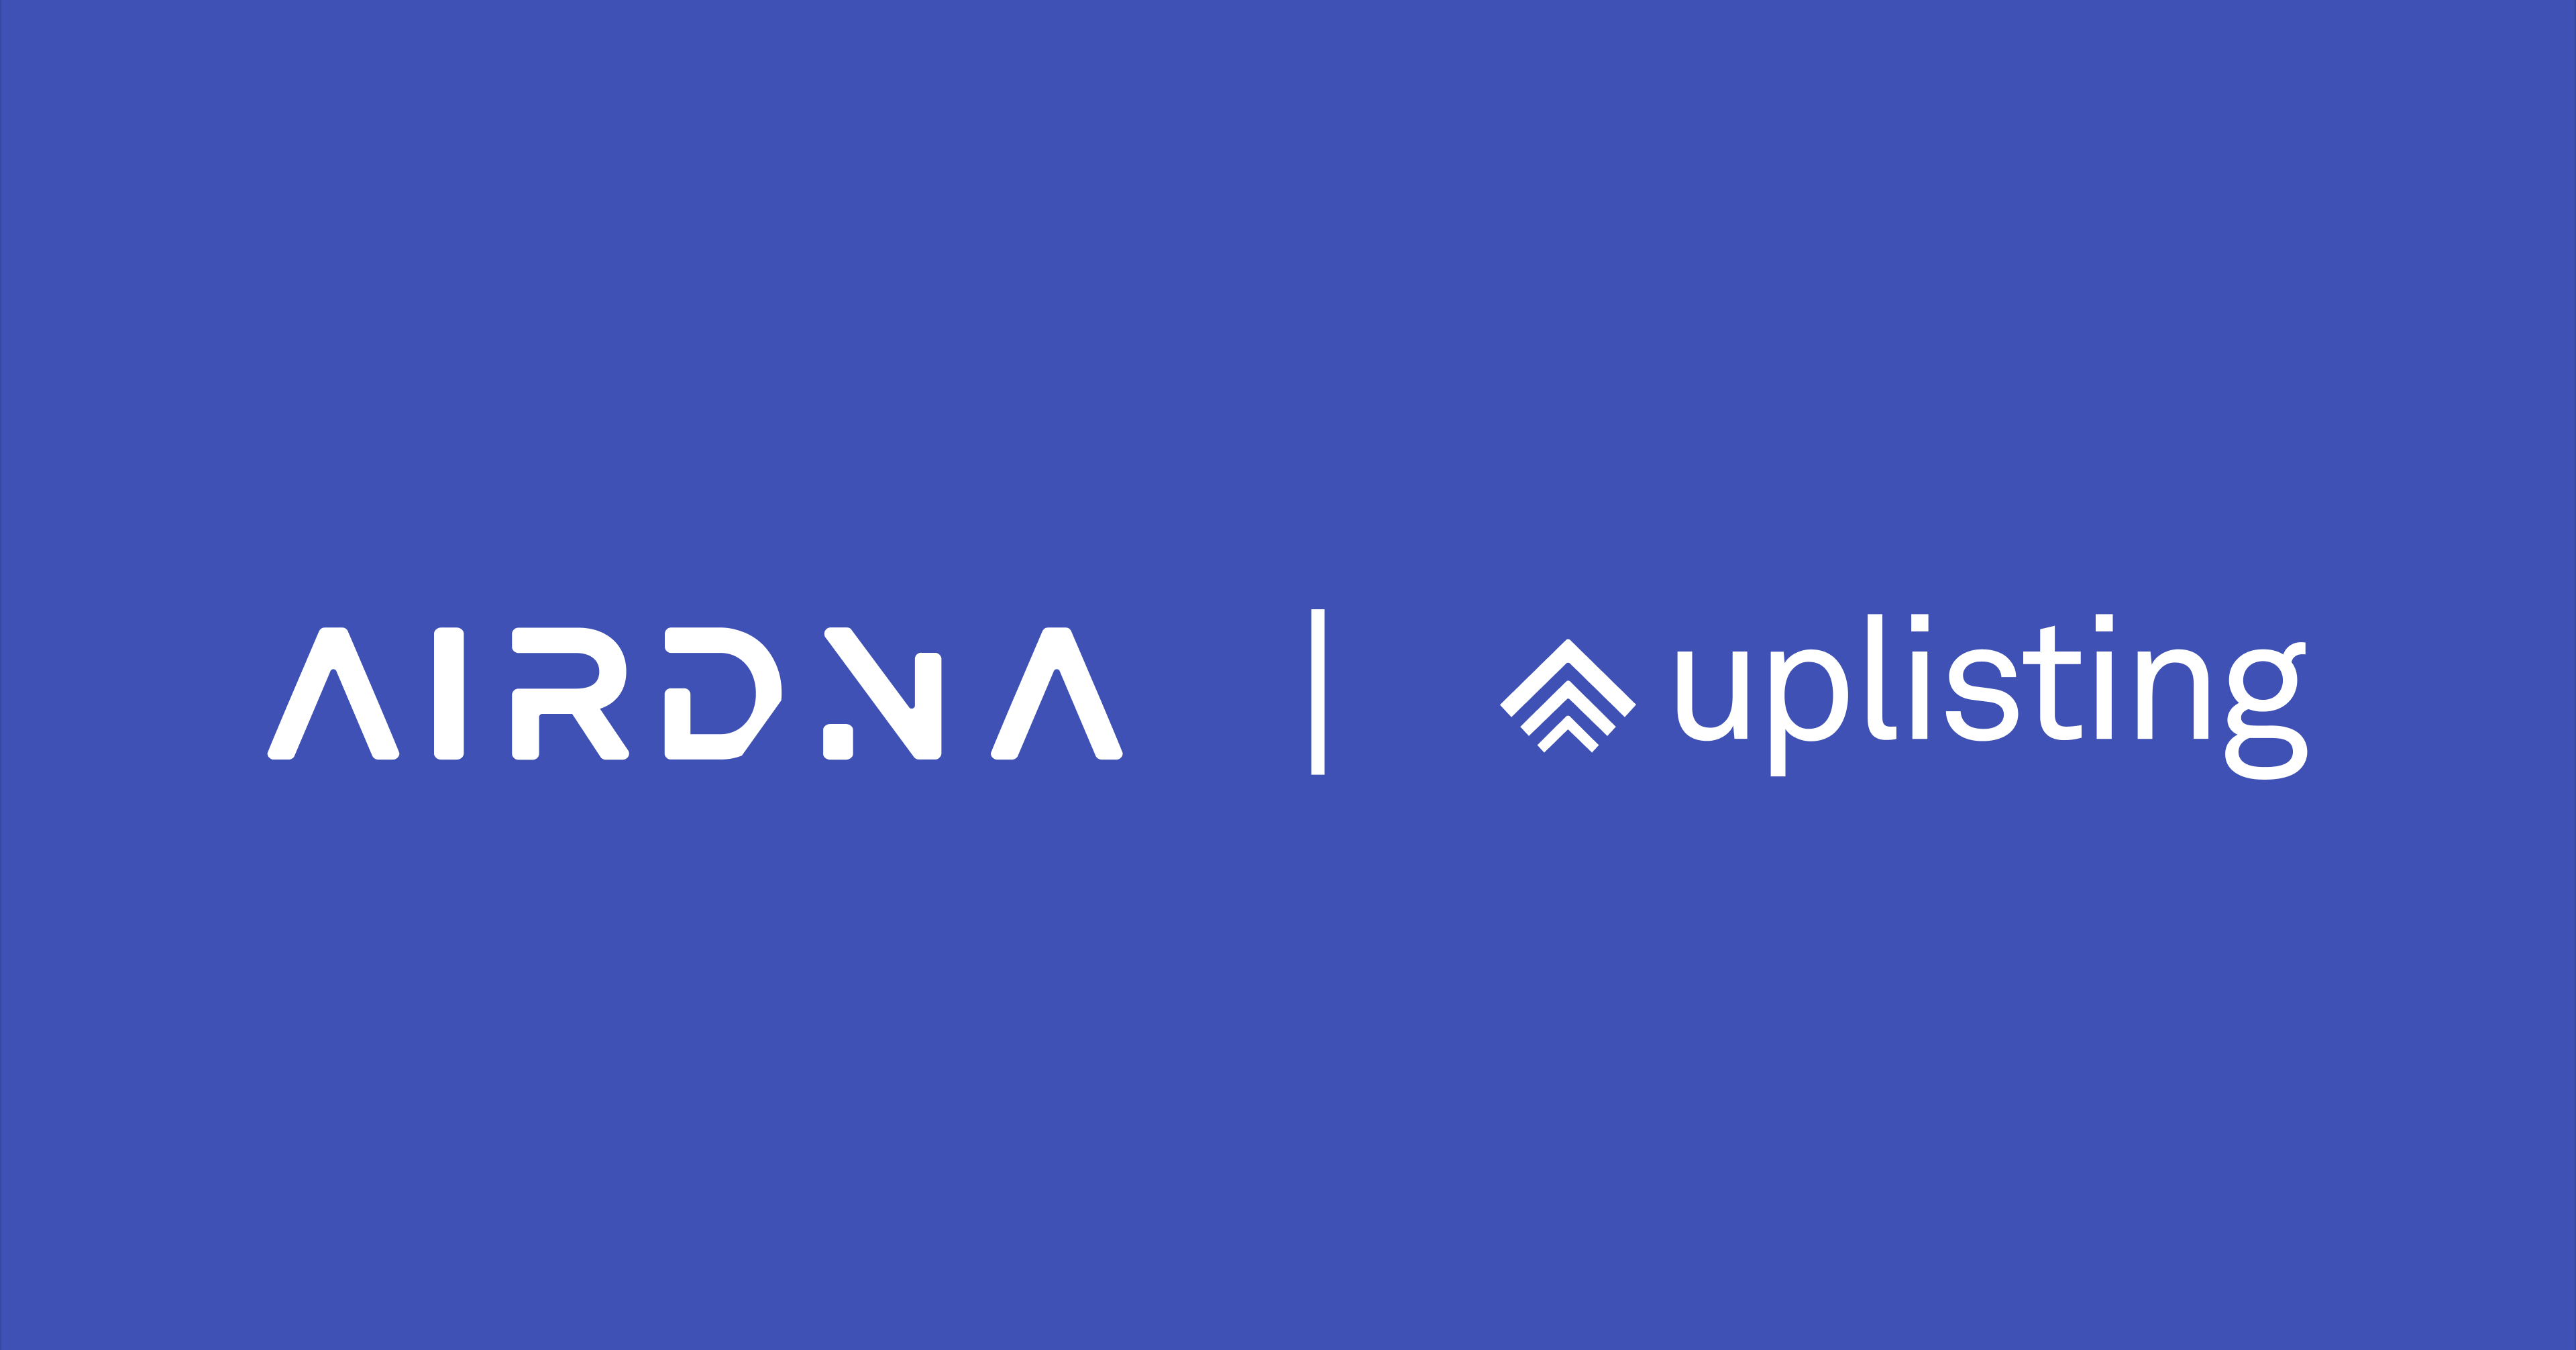 AirDNA acquires Uplisting, setting new standards in short-term rental intelligence and management